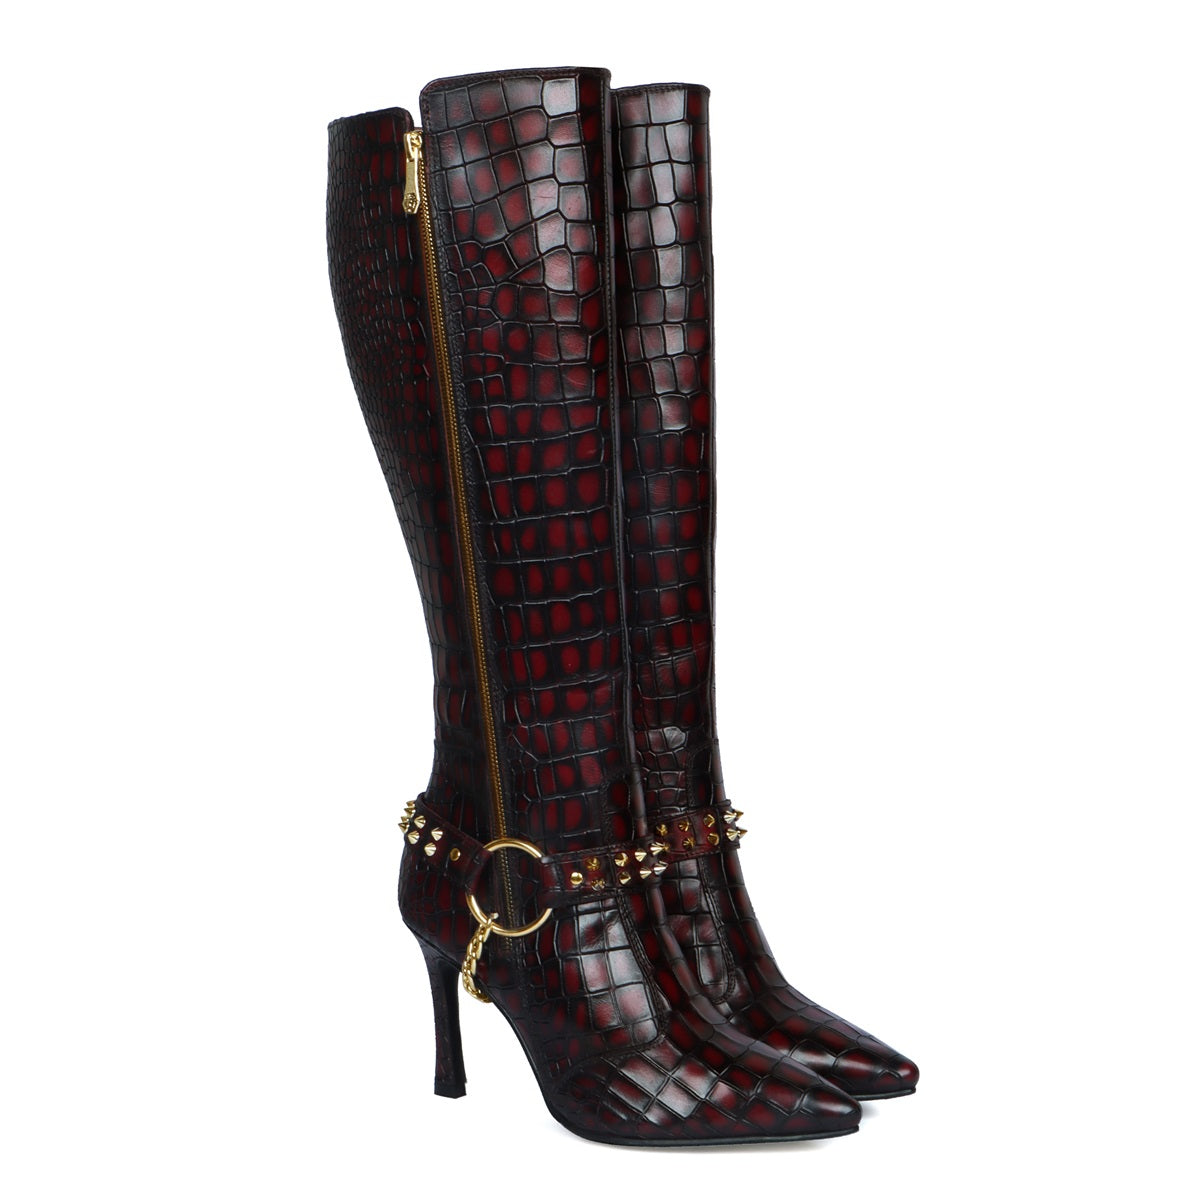 Ladies Stiletto Pencil Heel Boots Smokey Wine Pointed Toe Both Side Zip Closure Removable Studded Buckle Strap by Brune & Bareskin